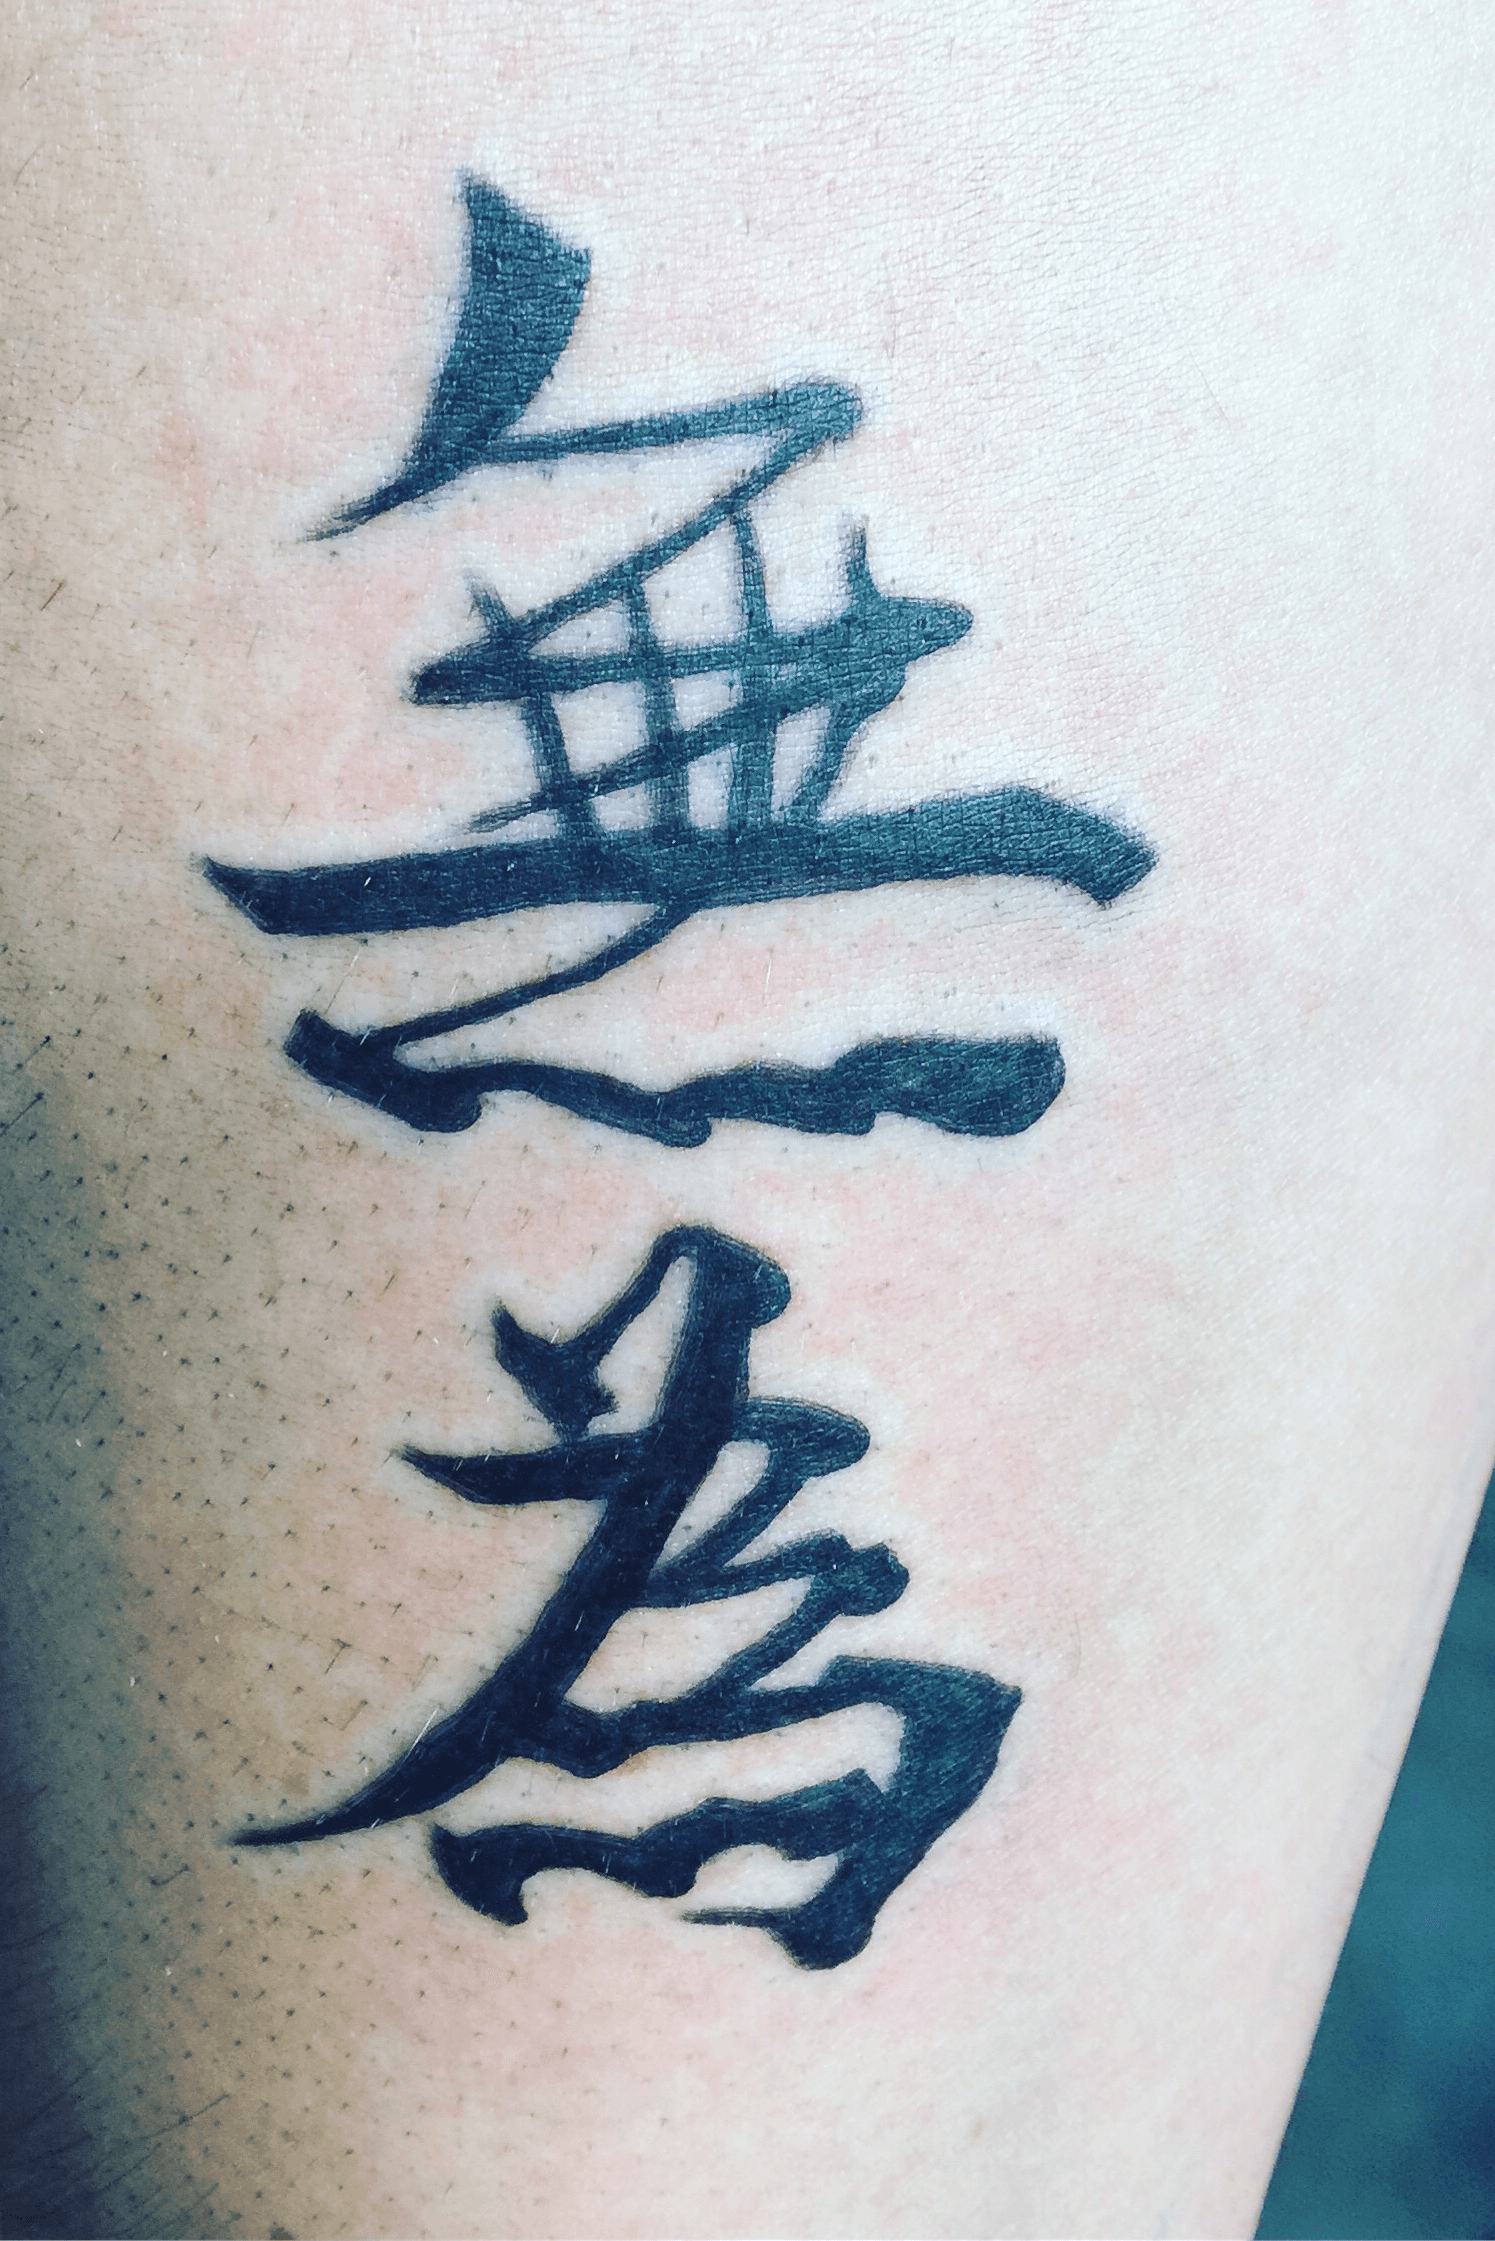 Tattoo uploaded by Drew Walter  The timeless symbol of the Tao radiates  with 4 arms in the Cardinal directions and 4 arms intertwining the red  blood which unites humanity Traditional Chinese